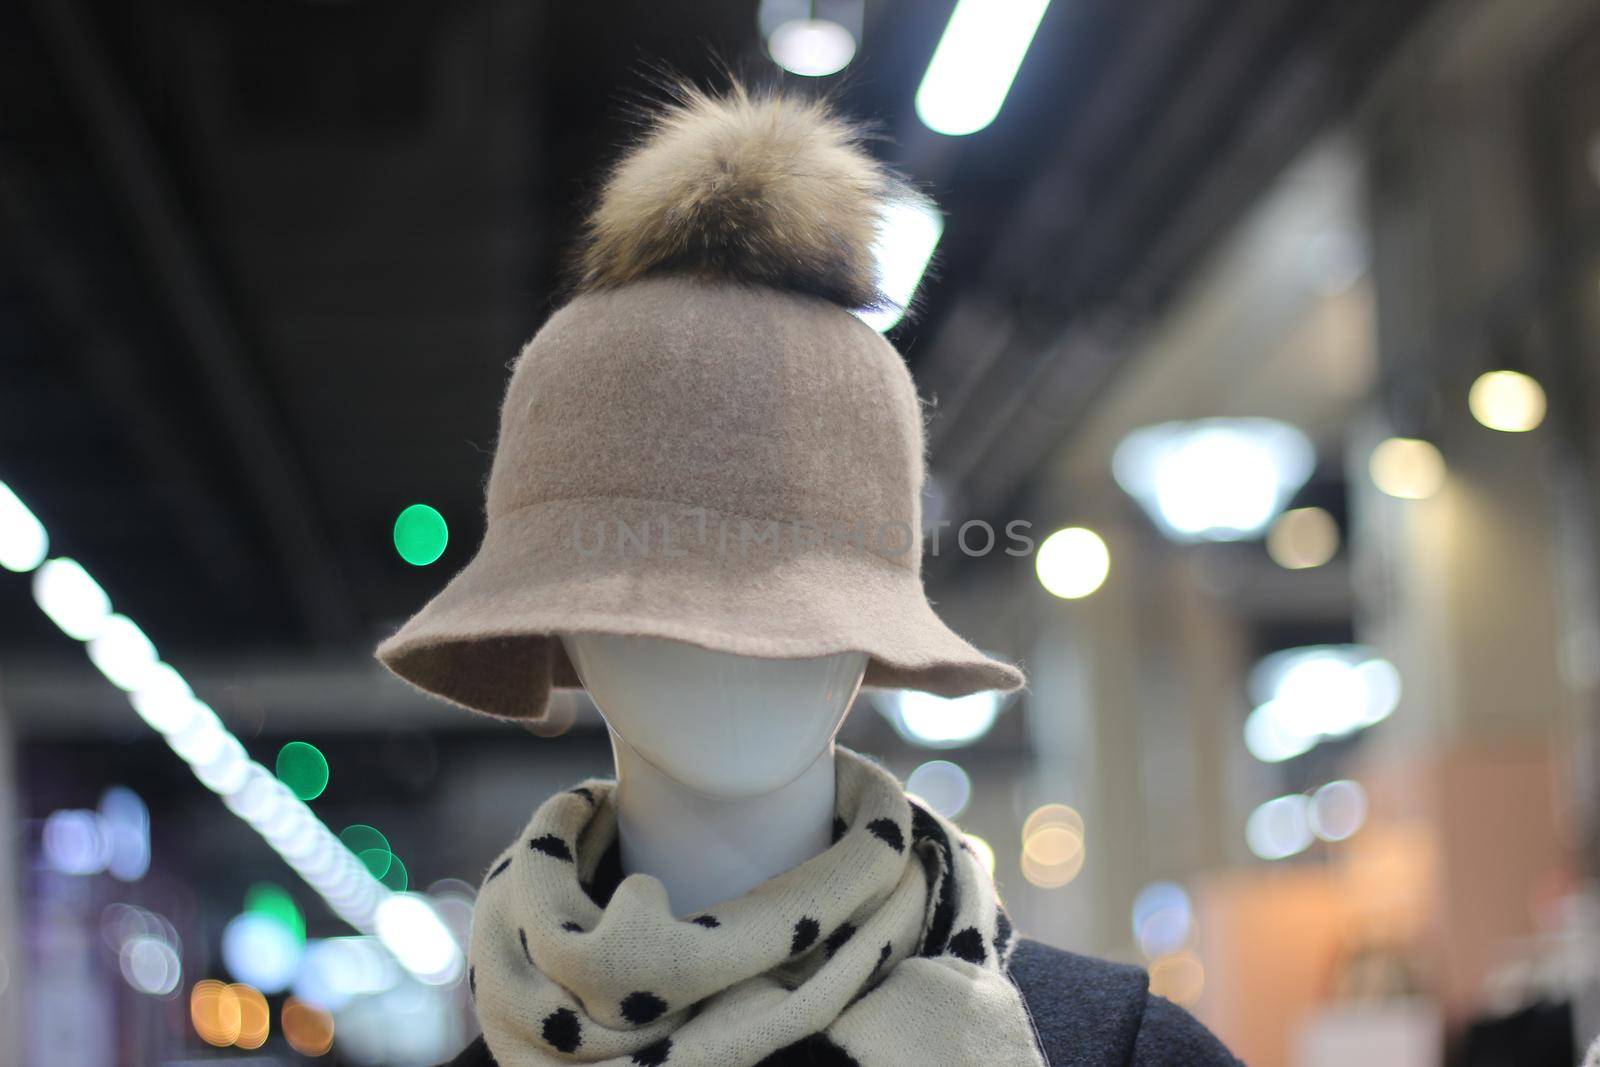 Woolen white hat on a mannequin head displayed in a mall